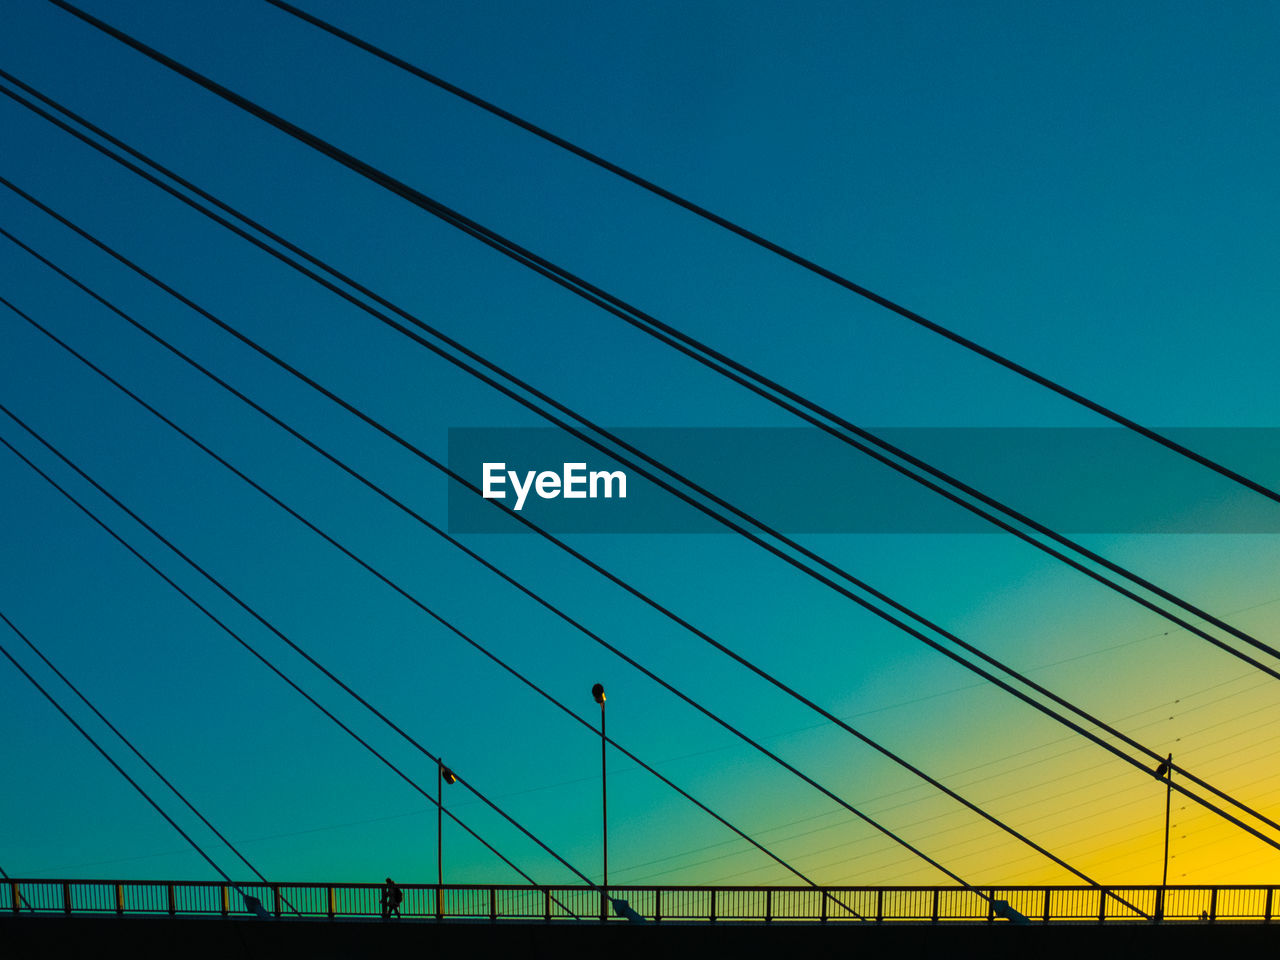 View of suspension bridge cables against sky at sunset